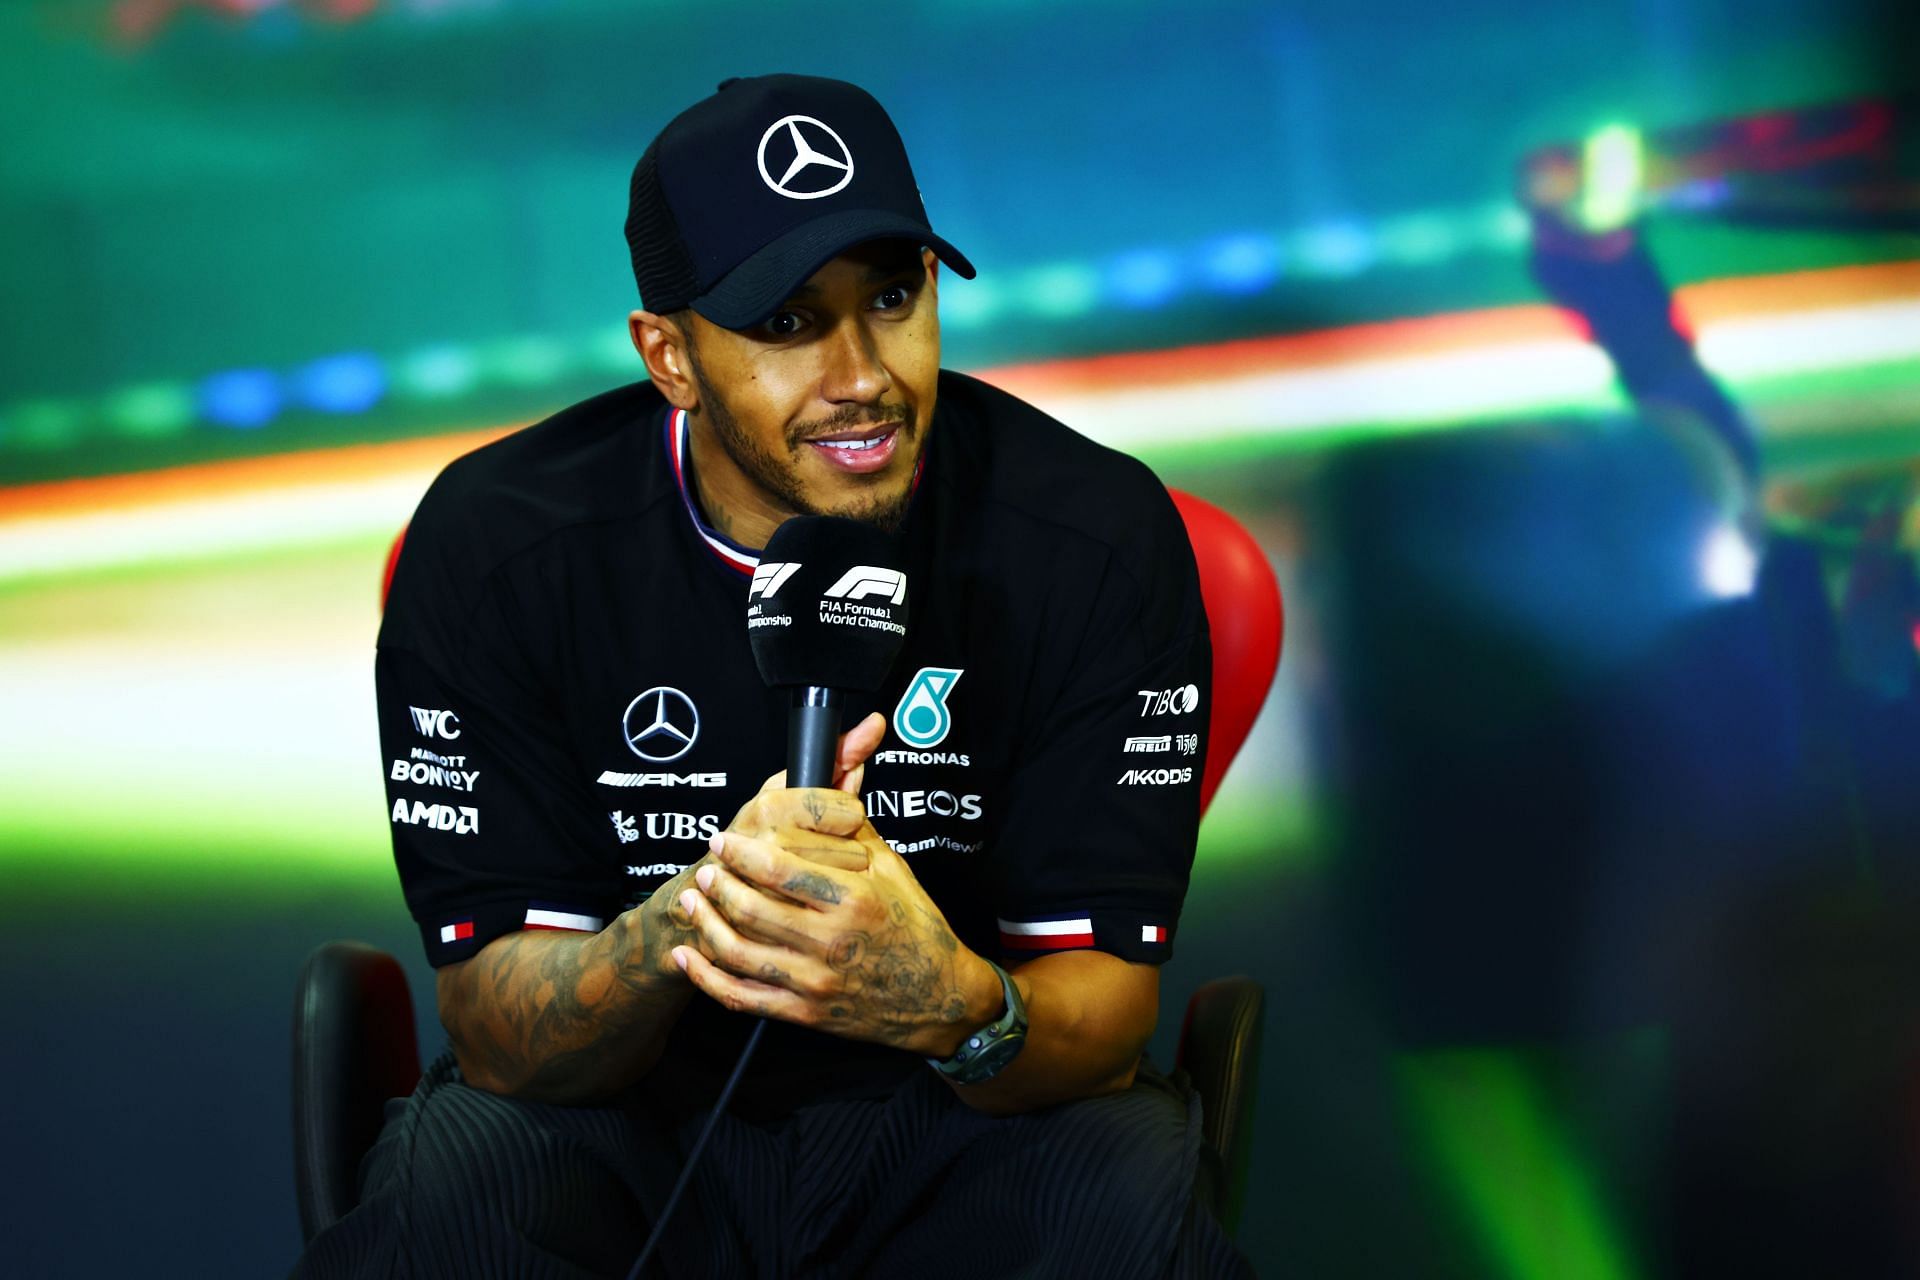 Lewis Hamilton will be part of the ownership group of the Denver Broncos